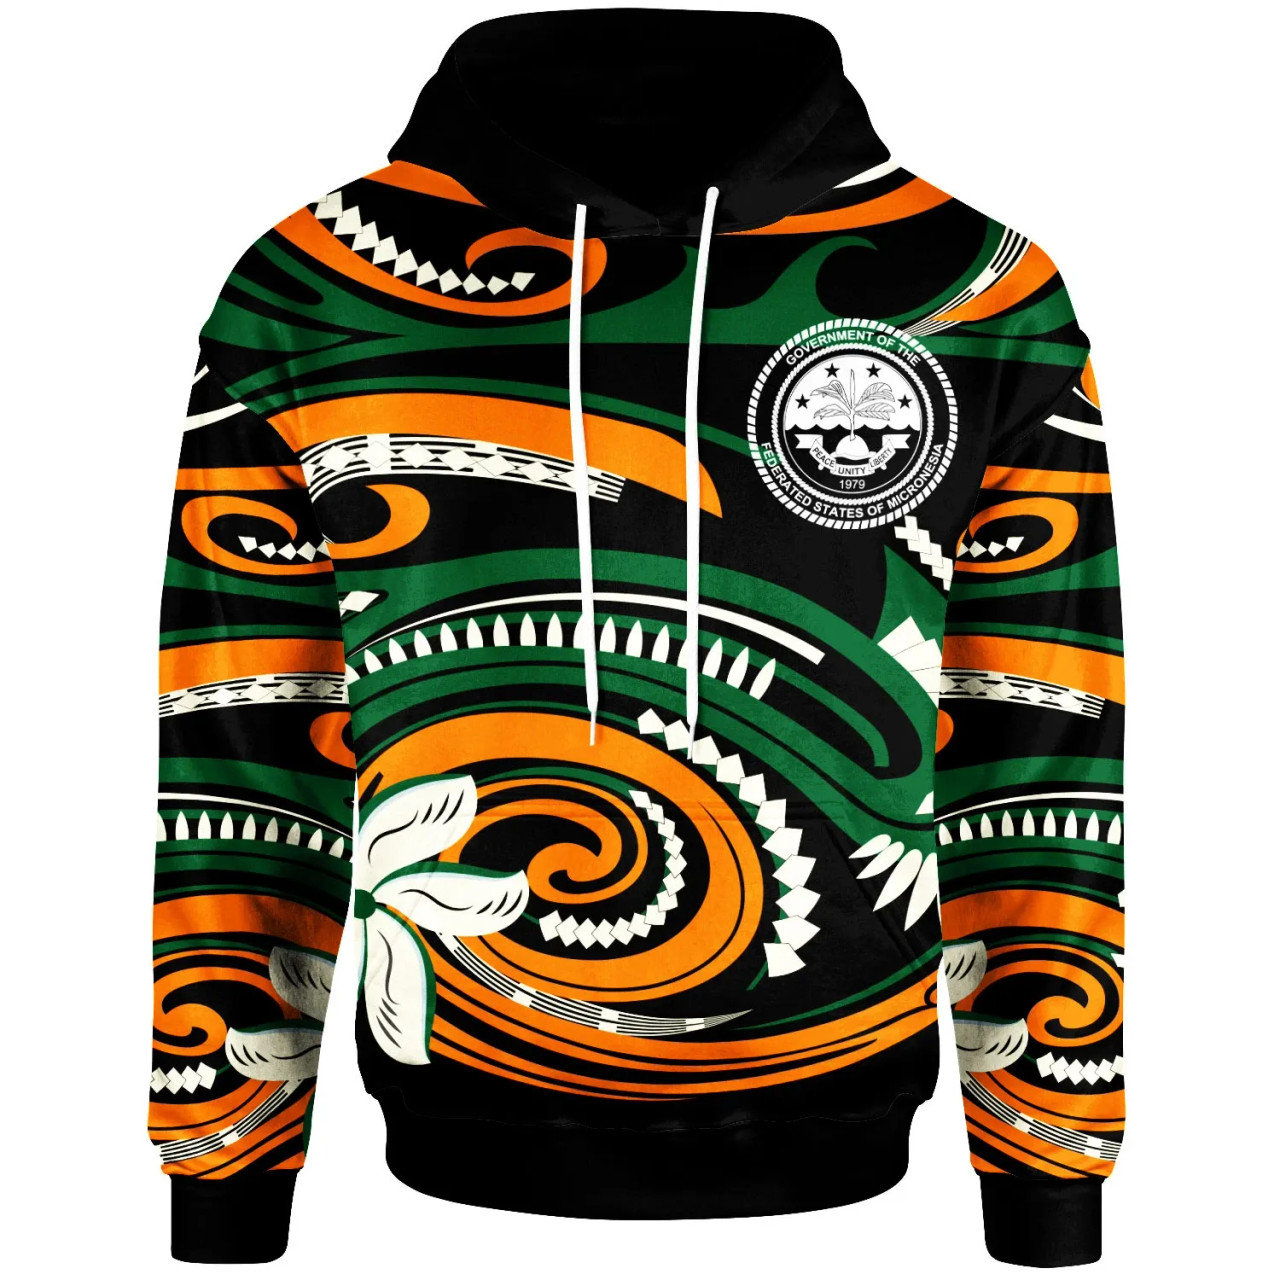 Federated States Of Micronesia Hoodie - Vortex Style